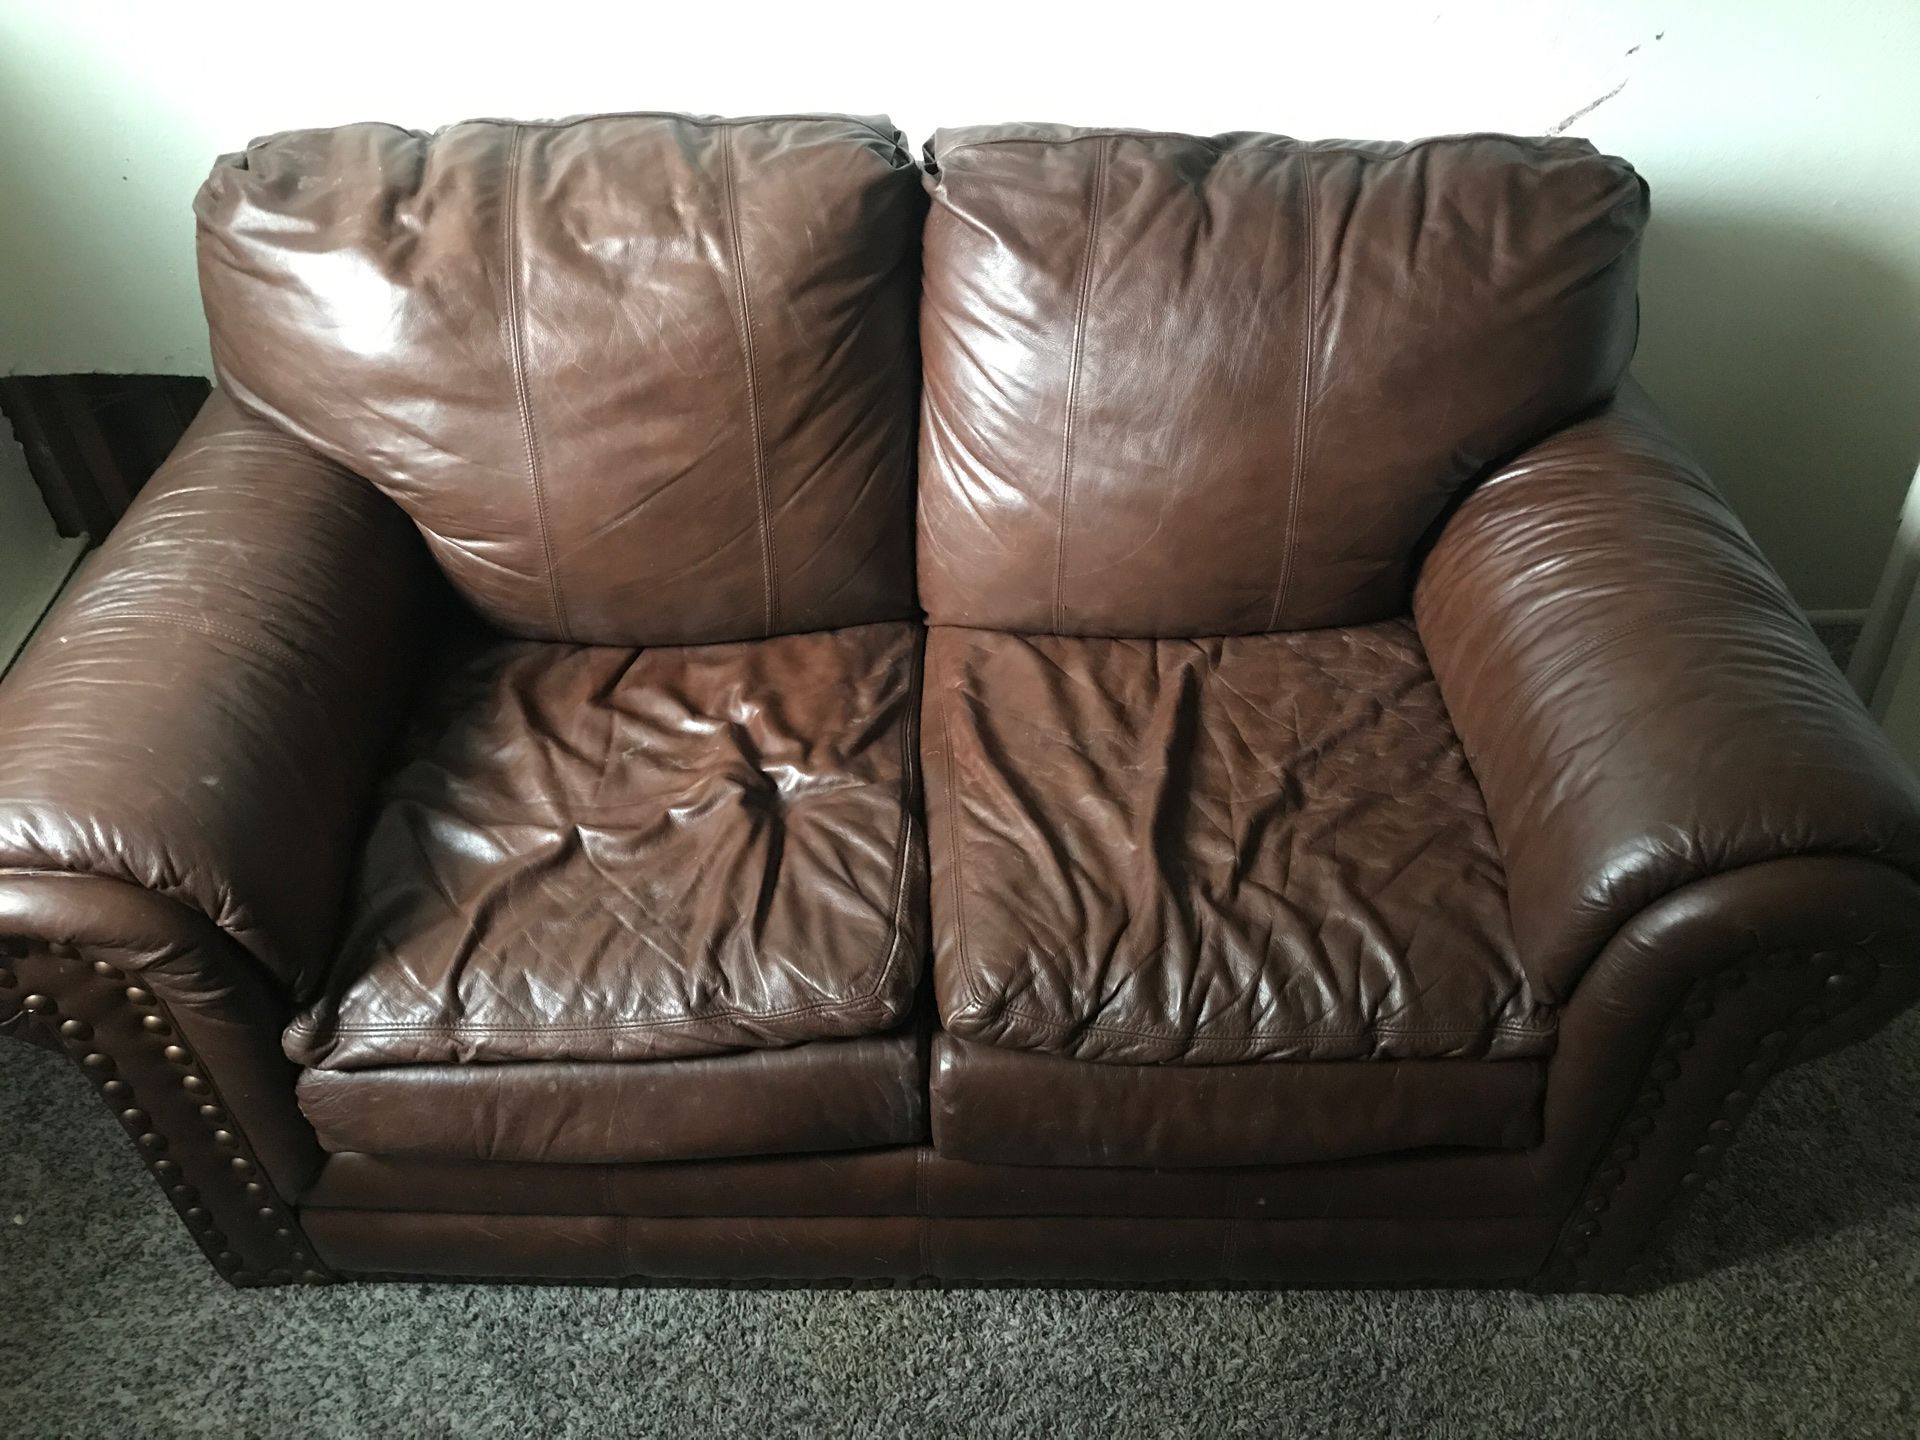 Leather couch $30